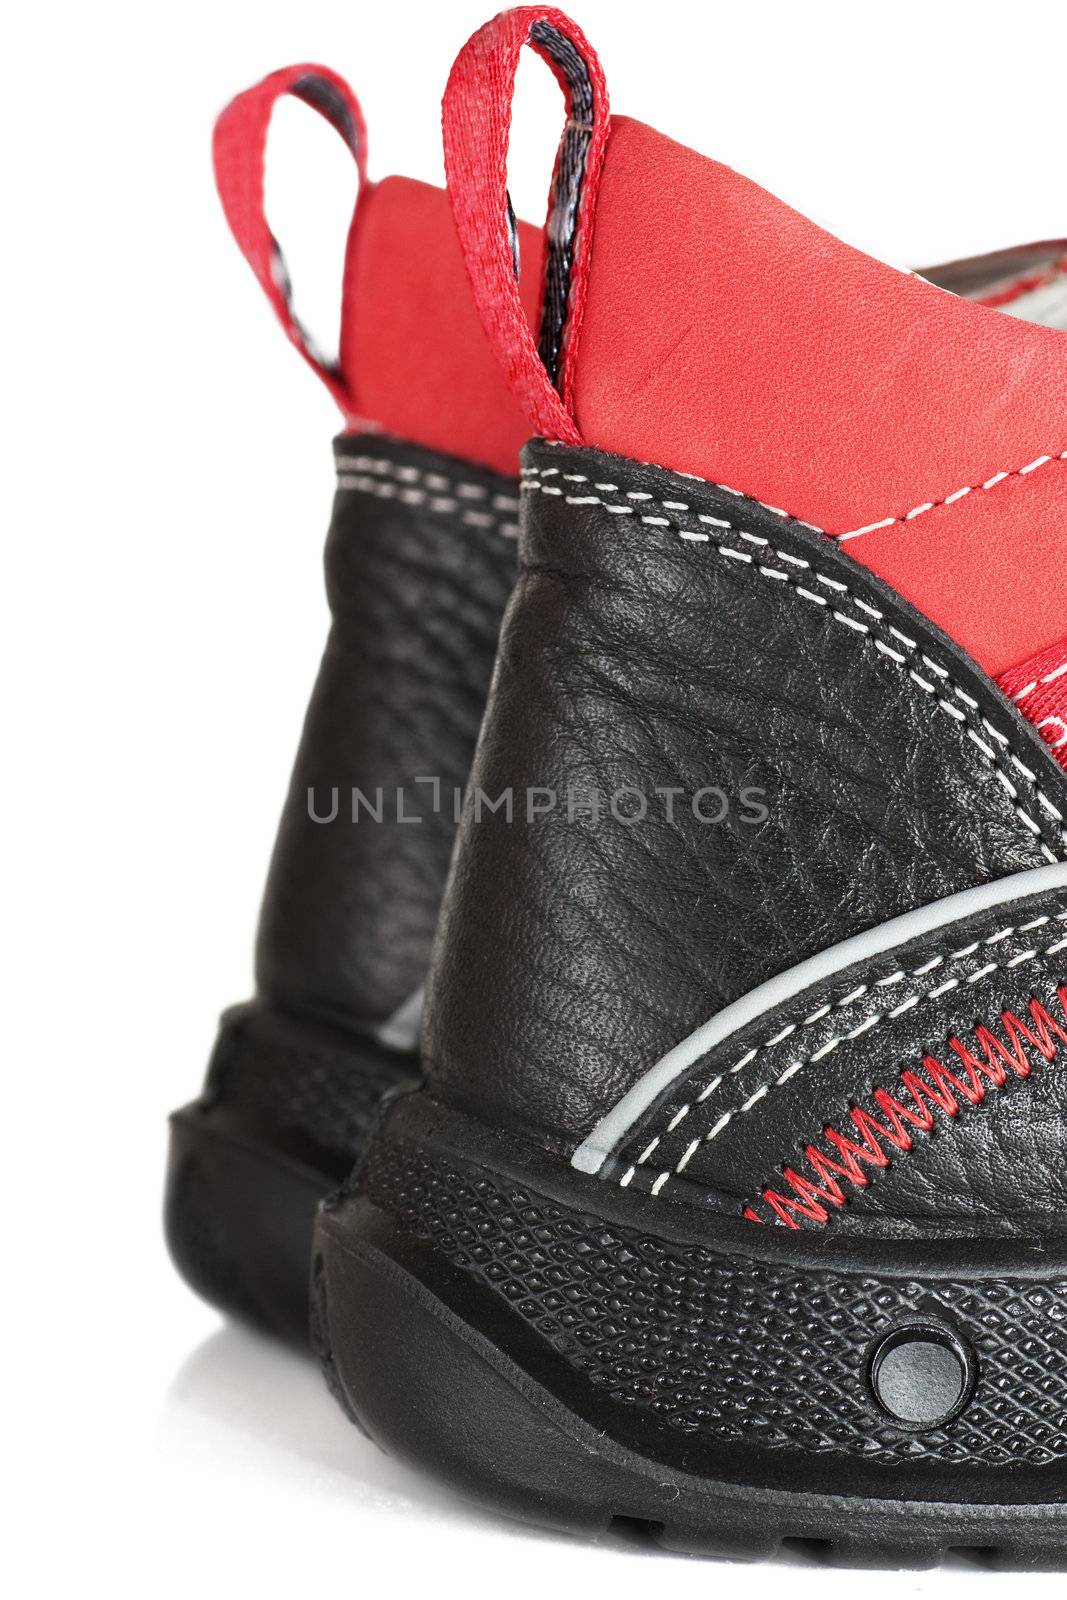 Pair of child shoes isolated over white background. Detailed veiw.